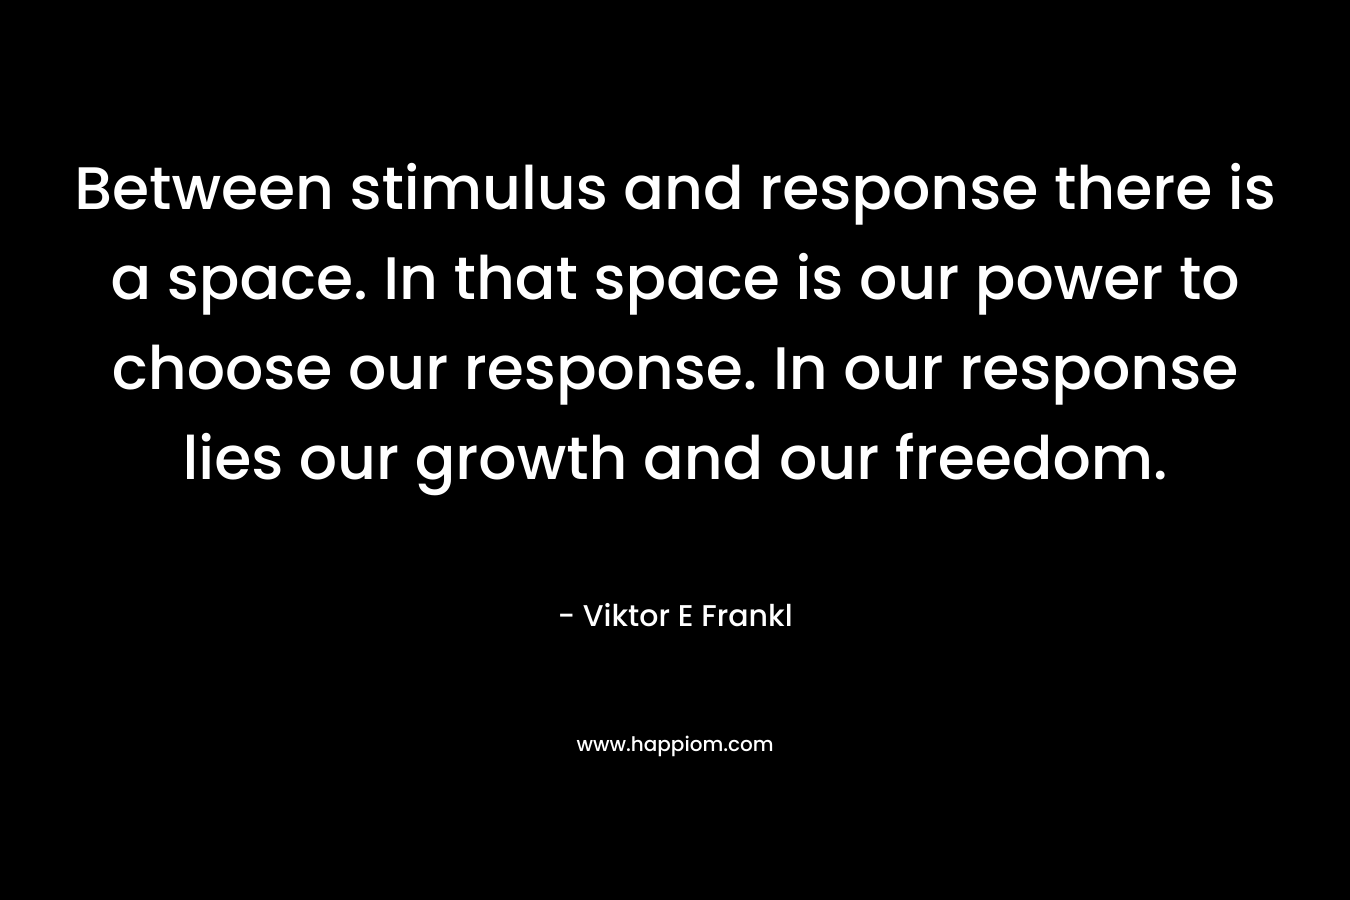 Between stimulus and response there is a space. In that space is our power to choose our response. In our response lies our growth and our freedom. – Viktor E Frankl